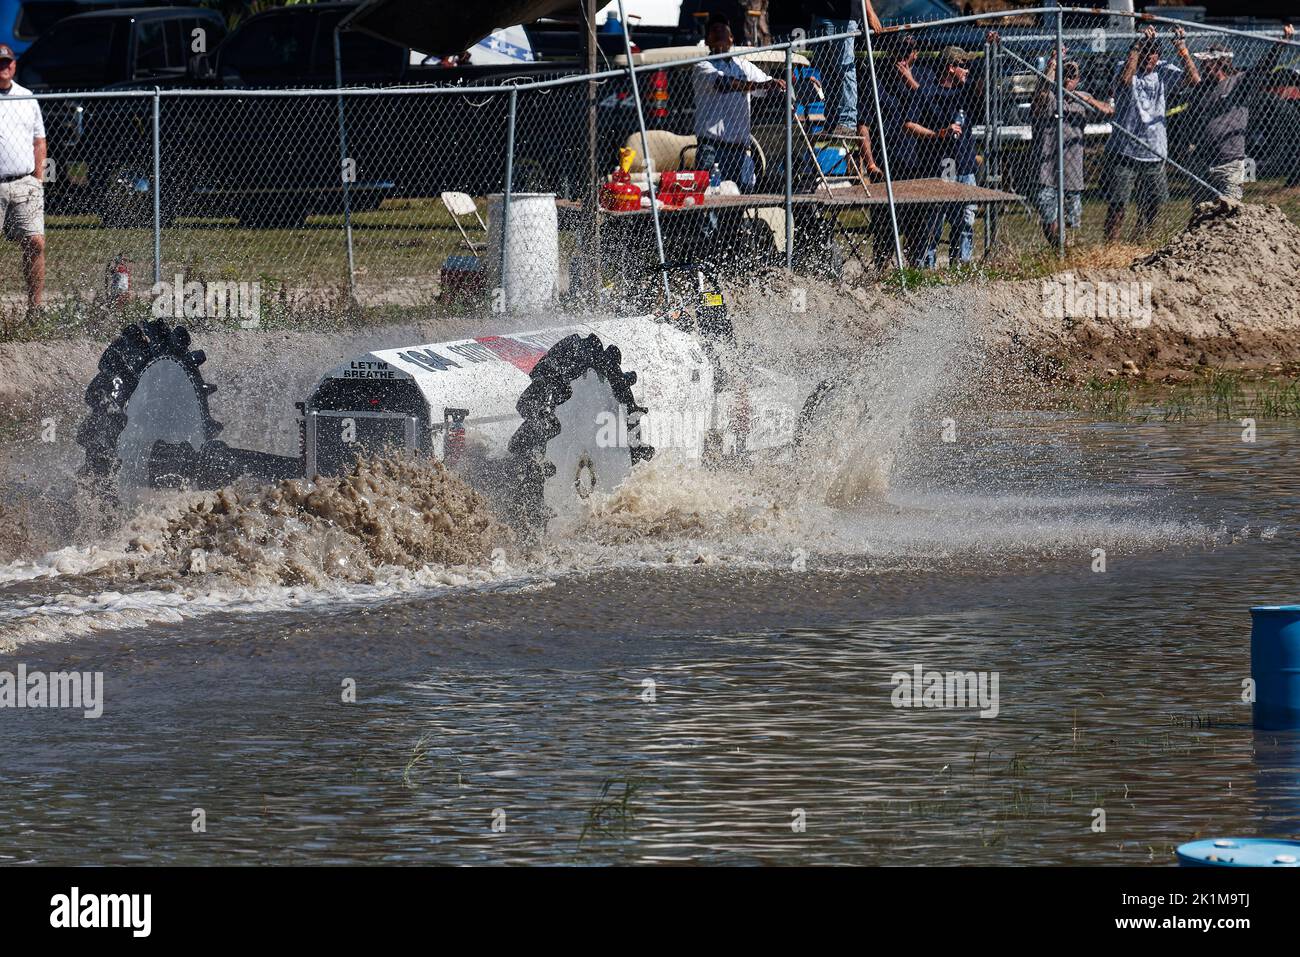 swamp buggy moving through water, action, close-up, spectators behind chain link fence, water spray, motion, jeep style, vehicle sport, Florida Sports Stock Photo